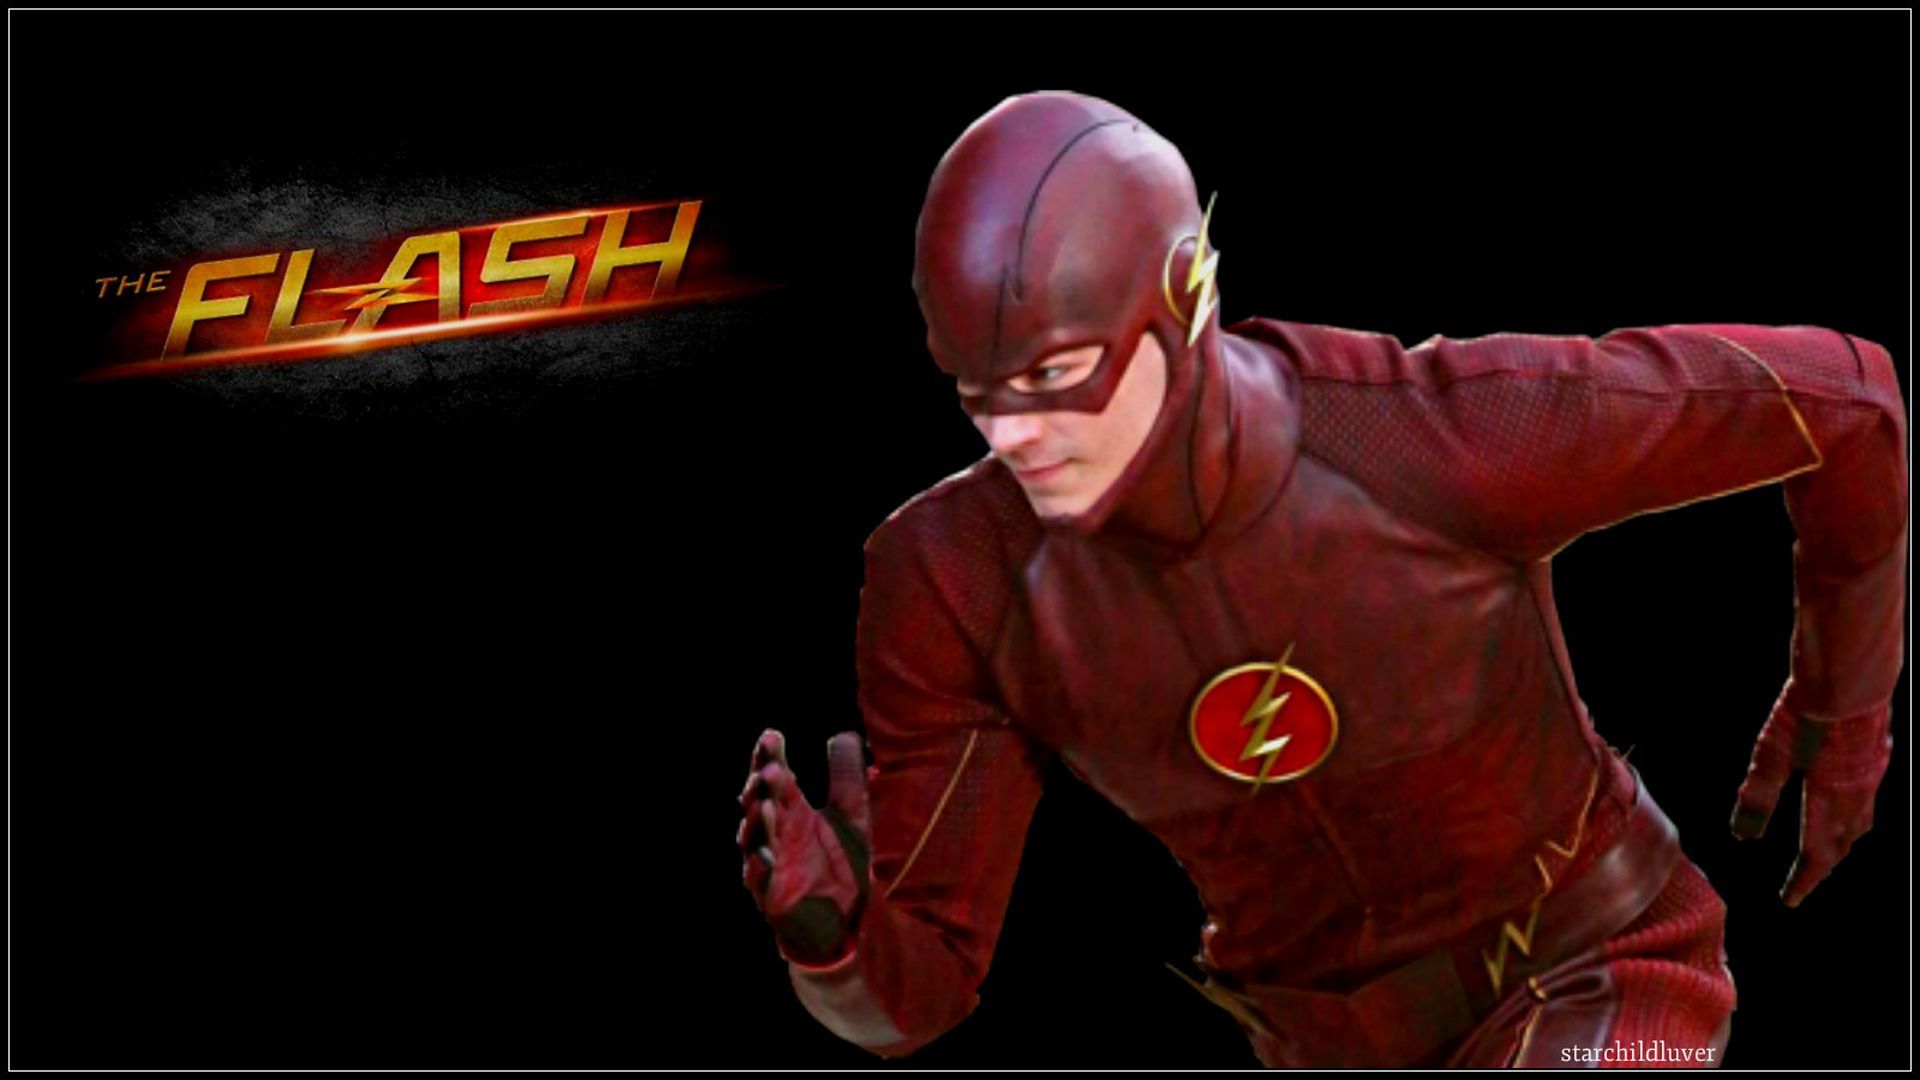 The Flash Wallpaper Backgrounds | HD Movie Backgrounds